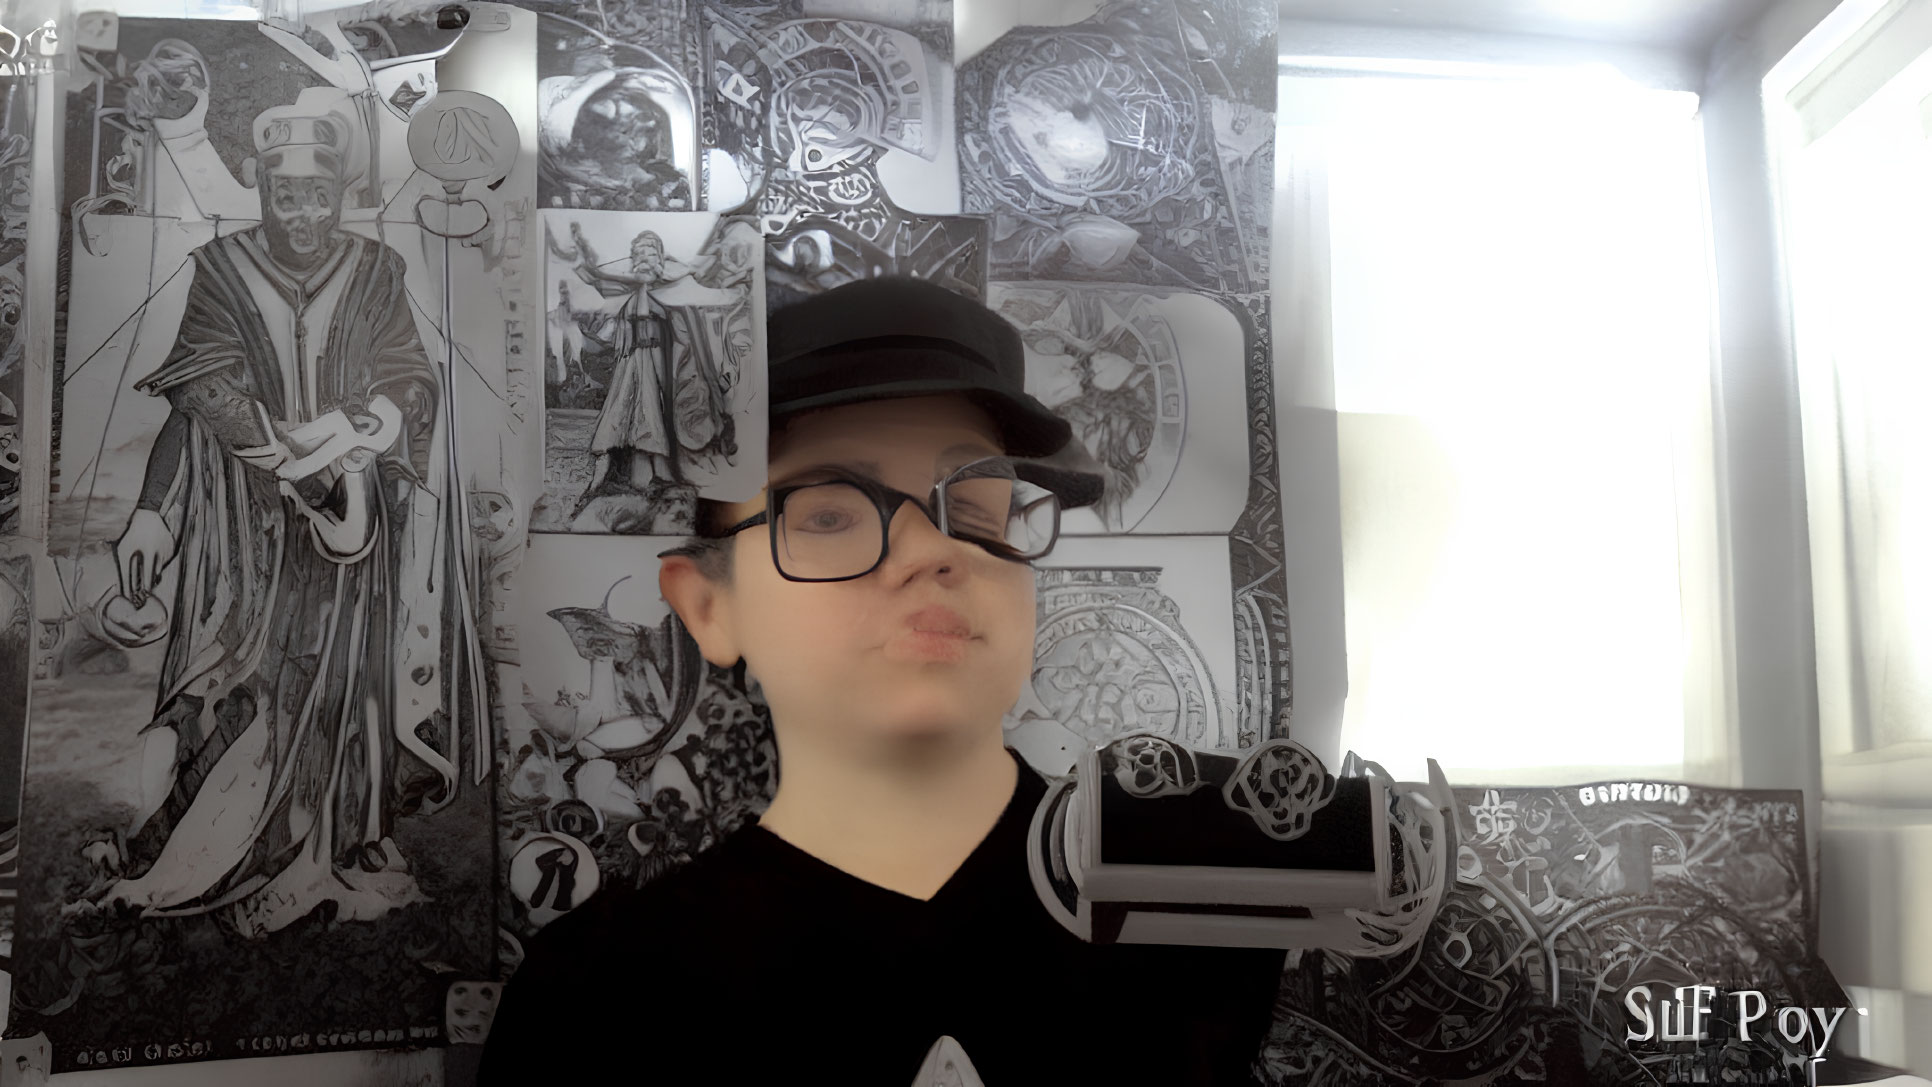 Cap and Glasses Wearer Puckering Lips in Selfie with Tarot Card Wall Art